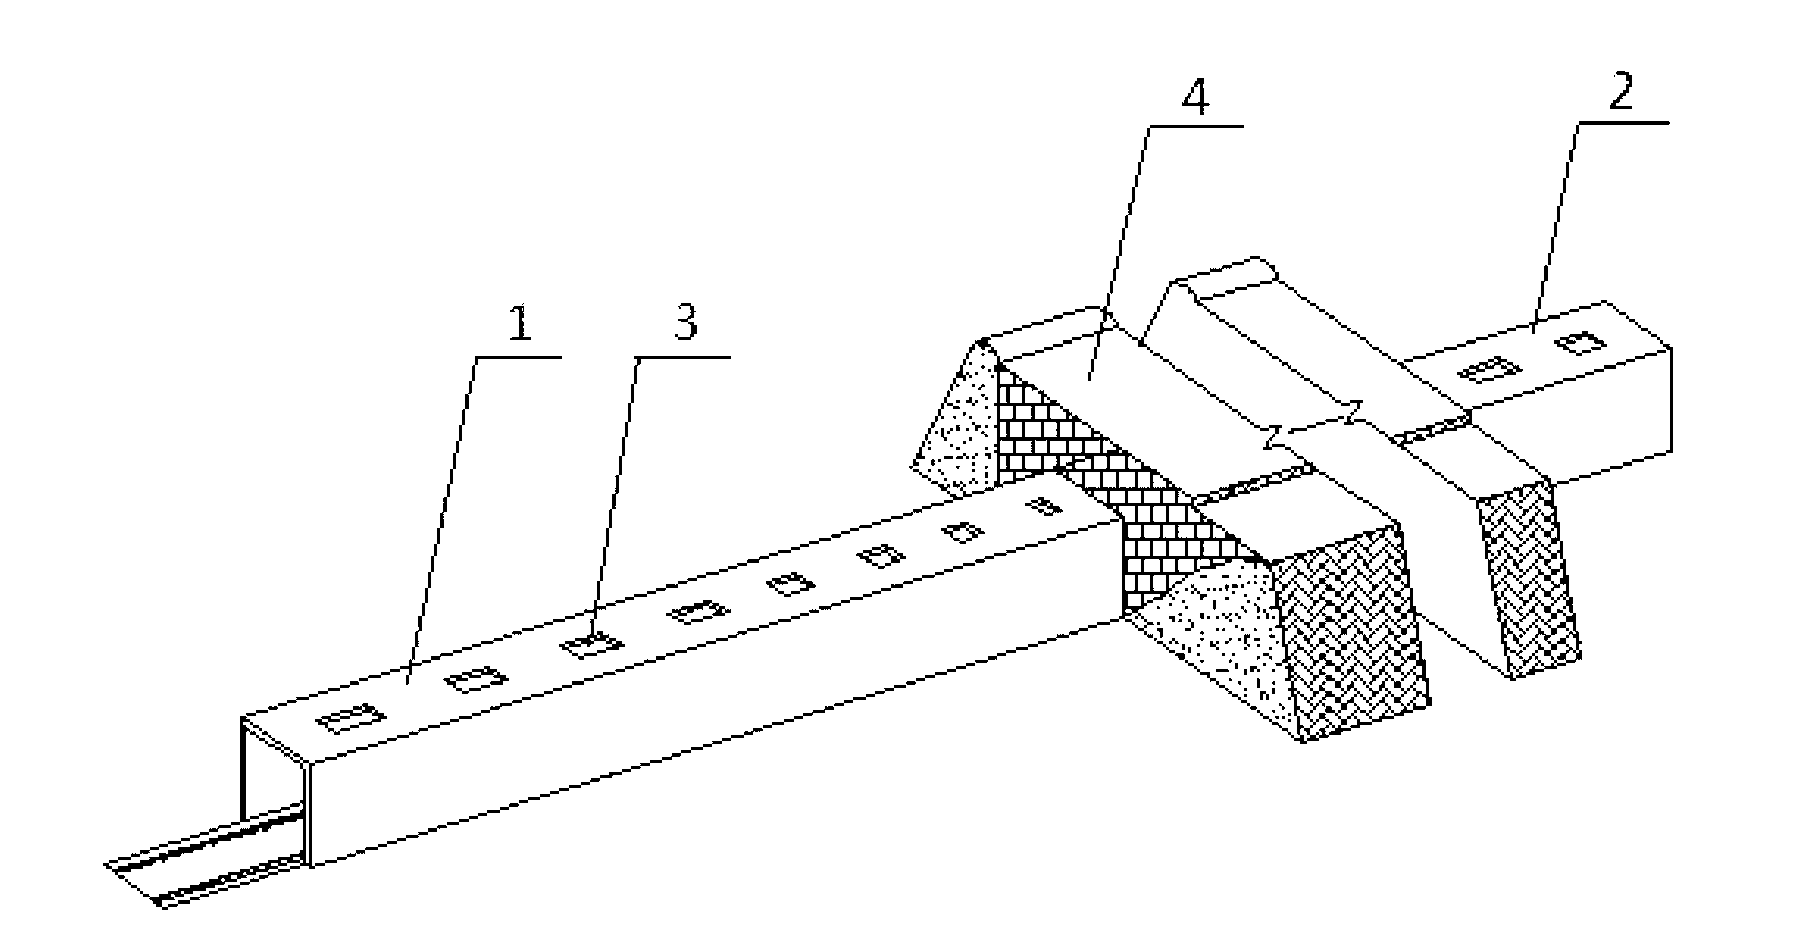 Buffer structure of single-track tunnel portal of high-speed rail